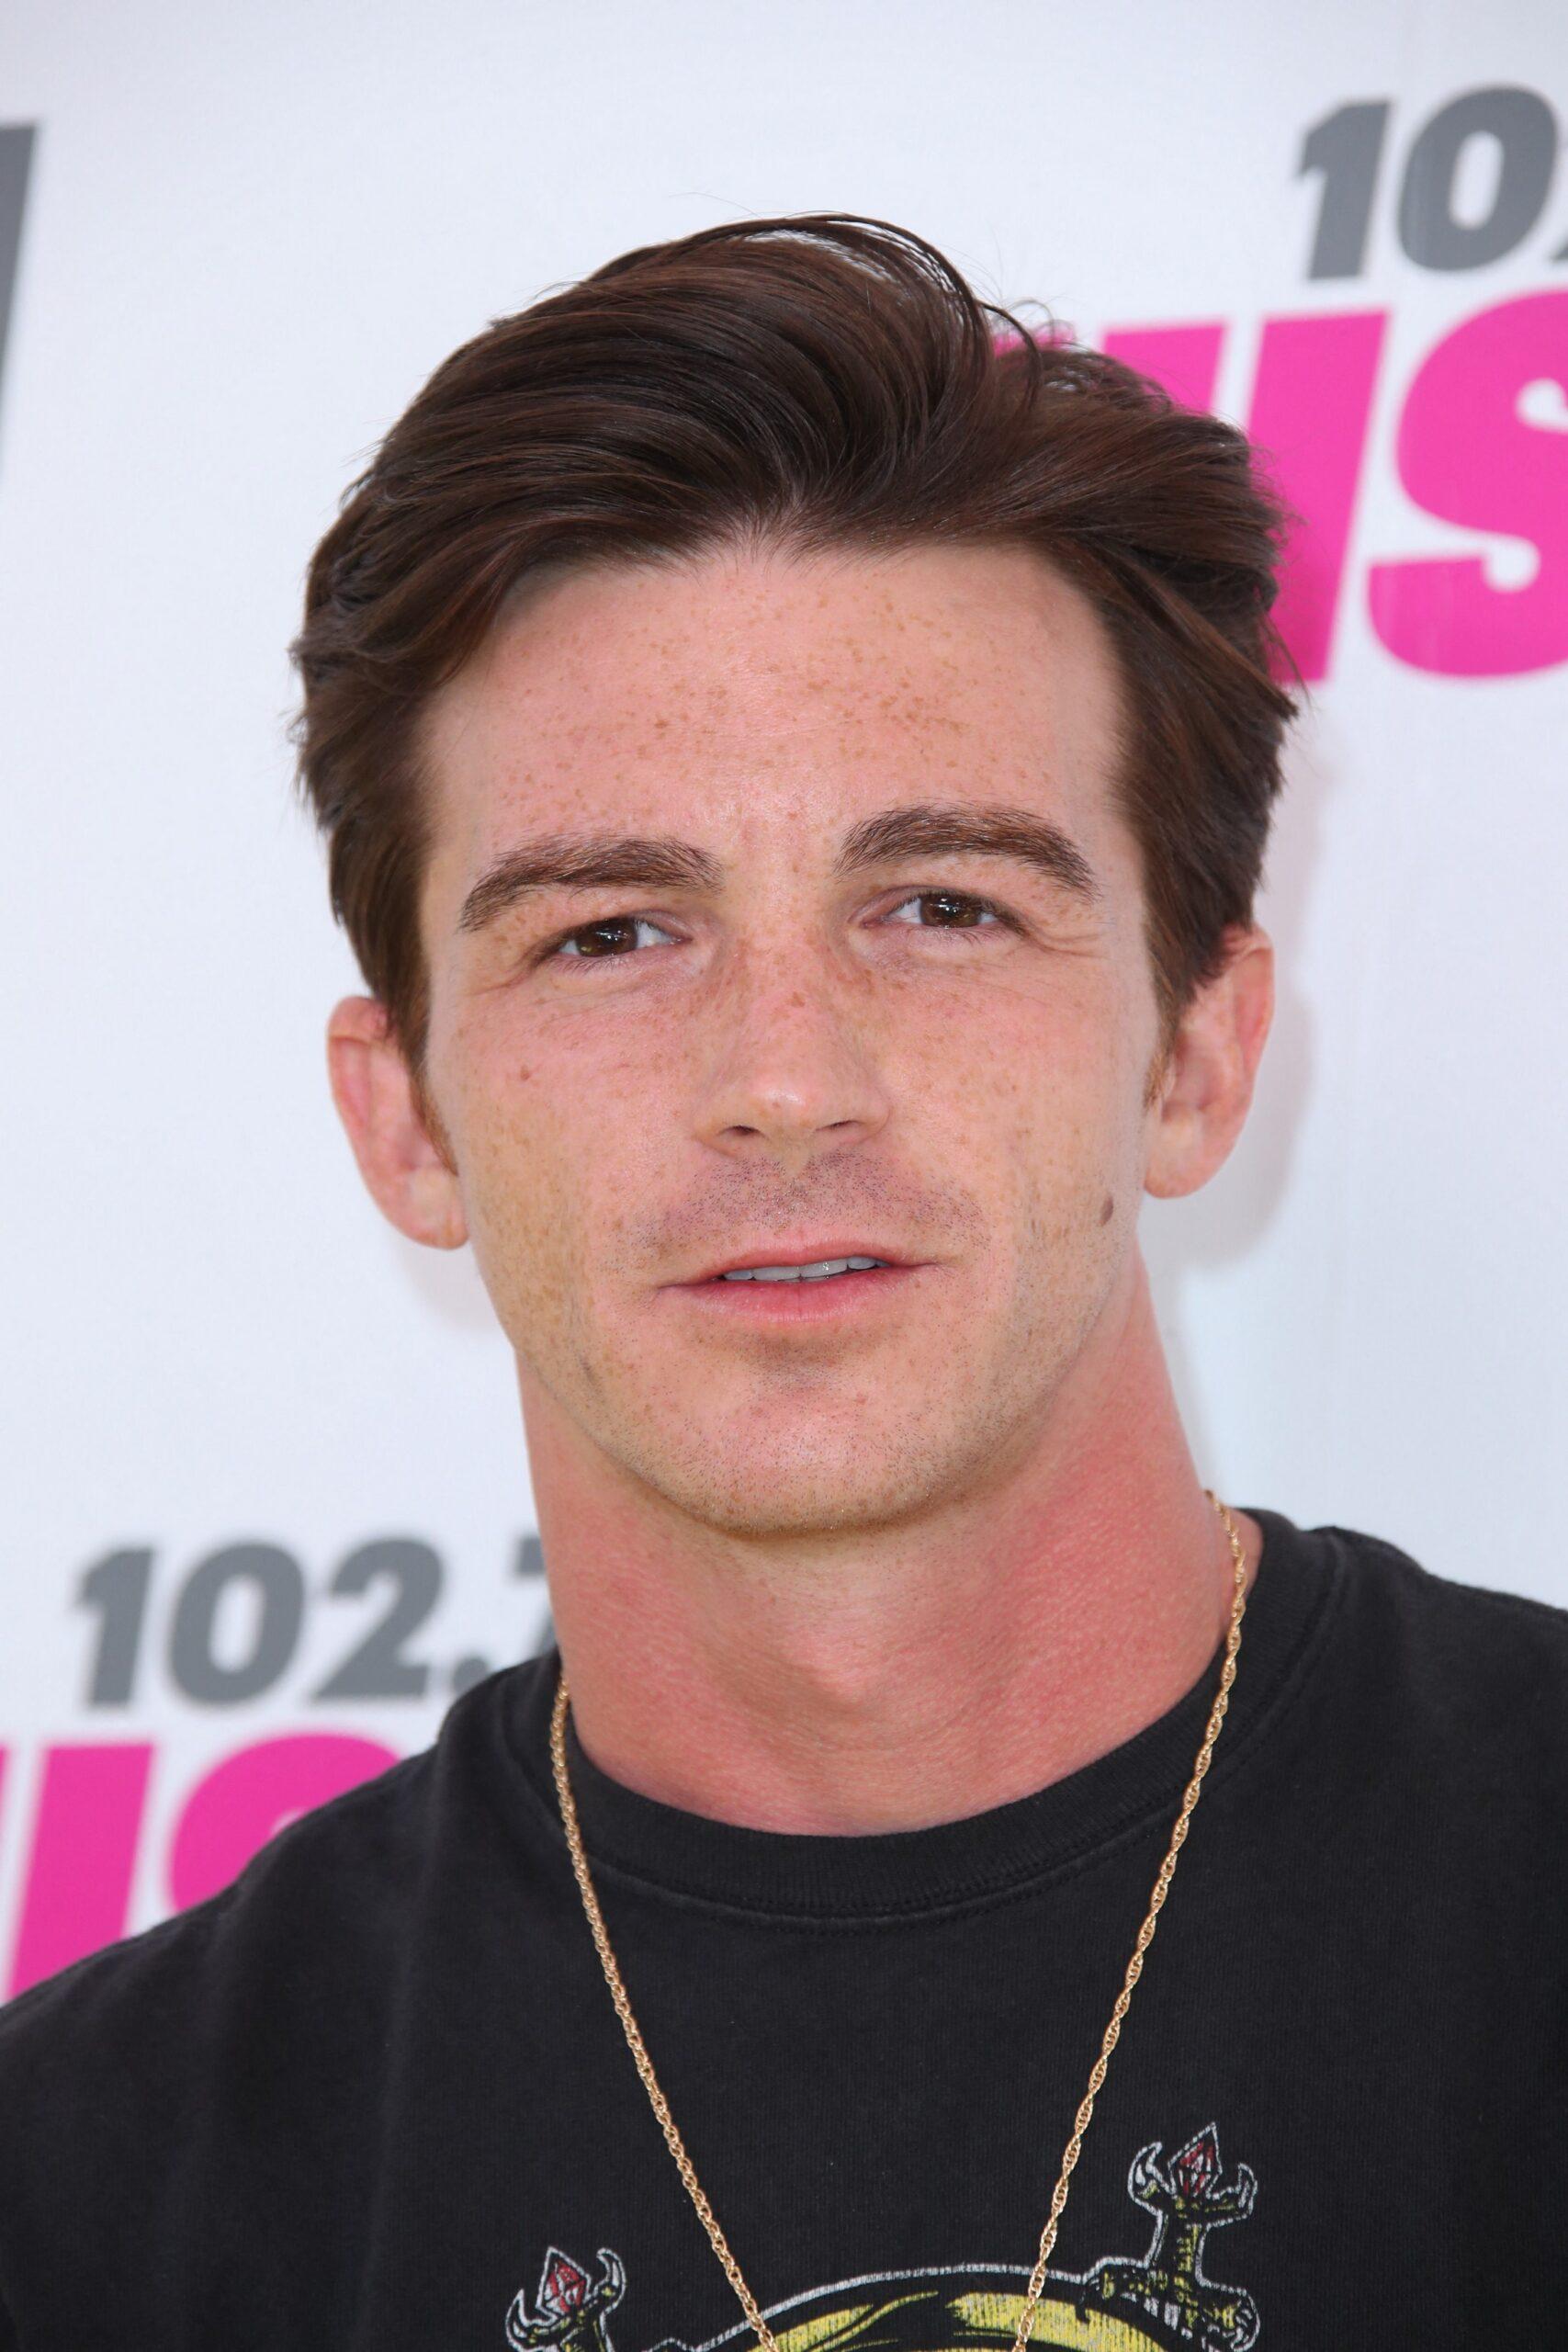 Drake Bell Reportedly Threatened Suicide Prior To Going Missing